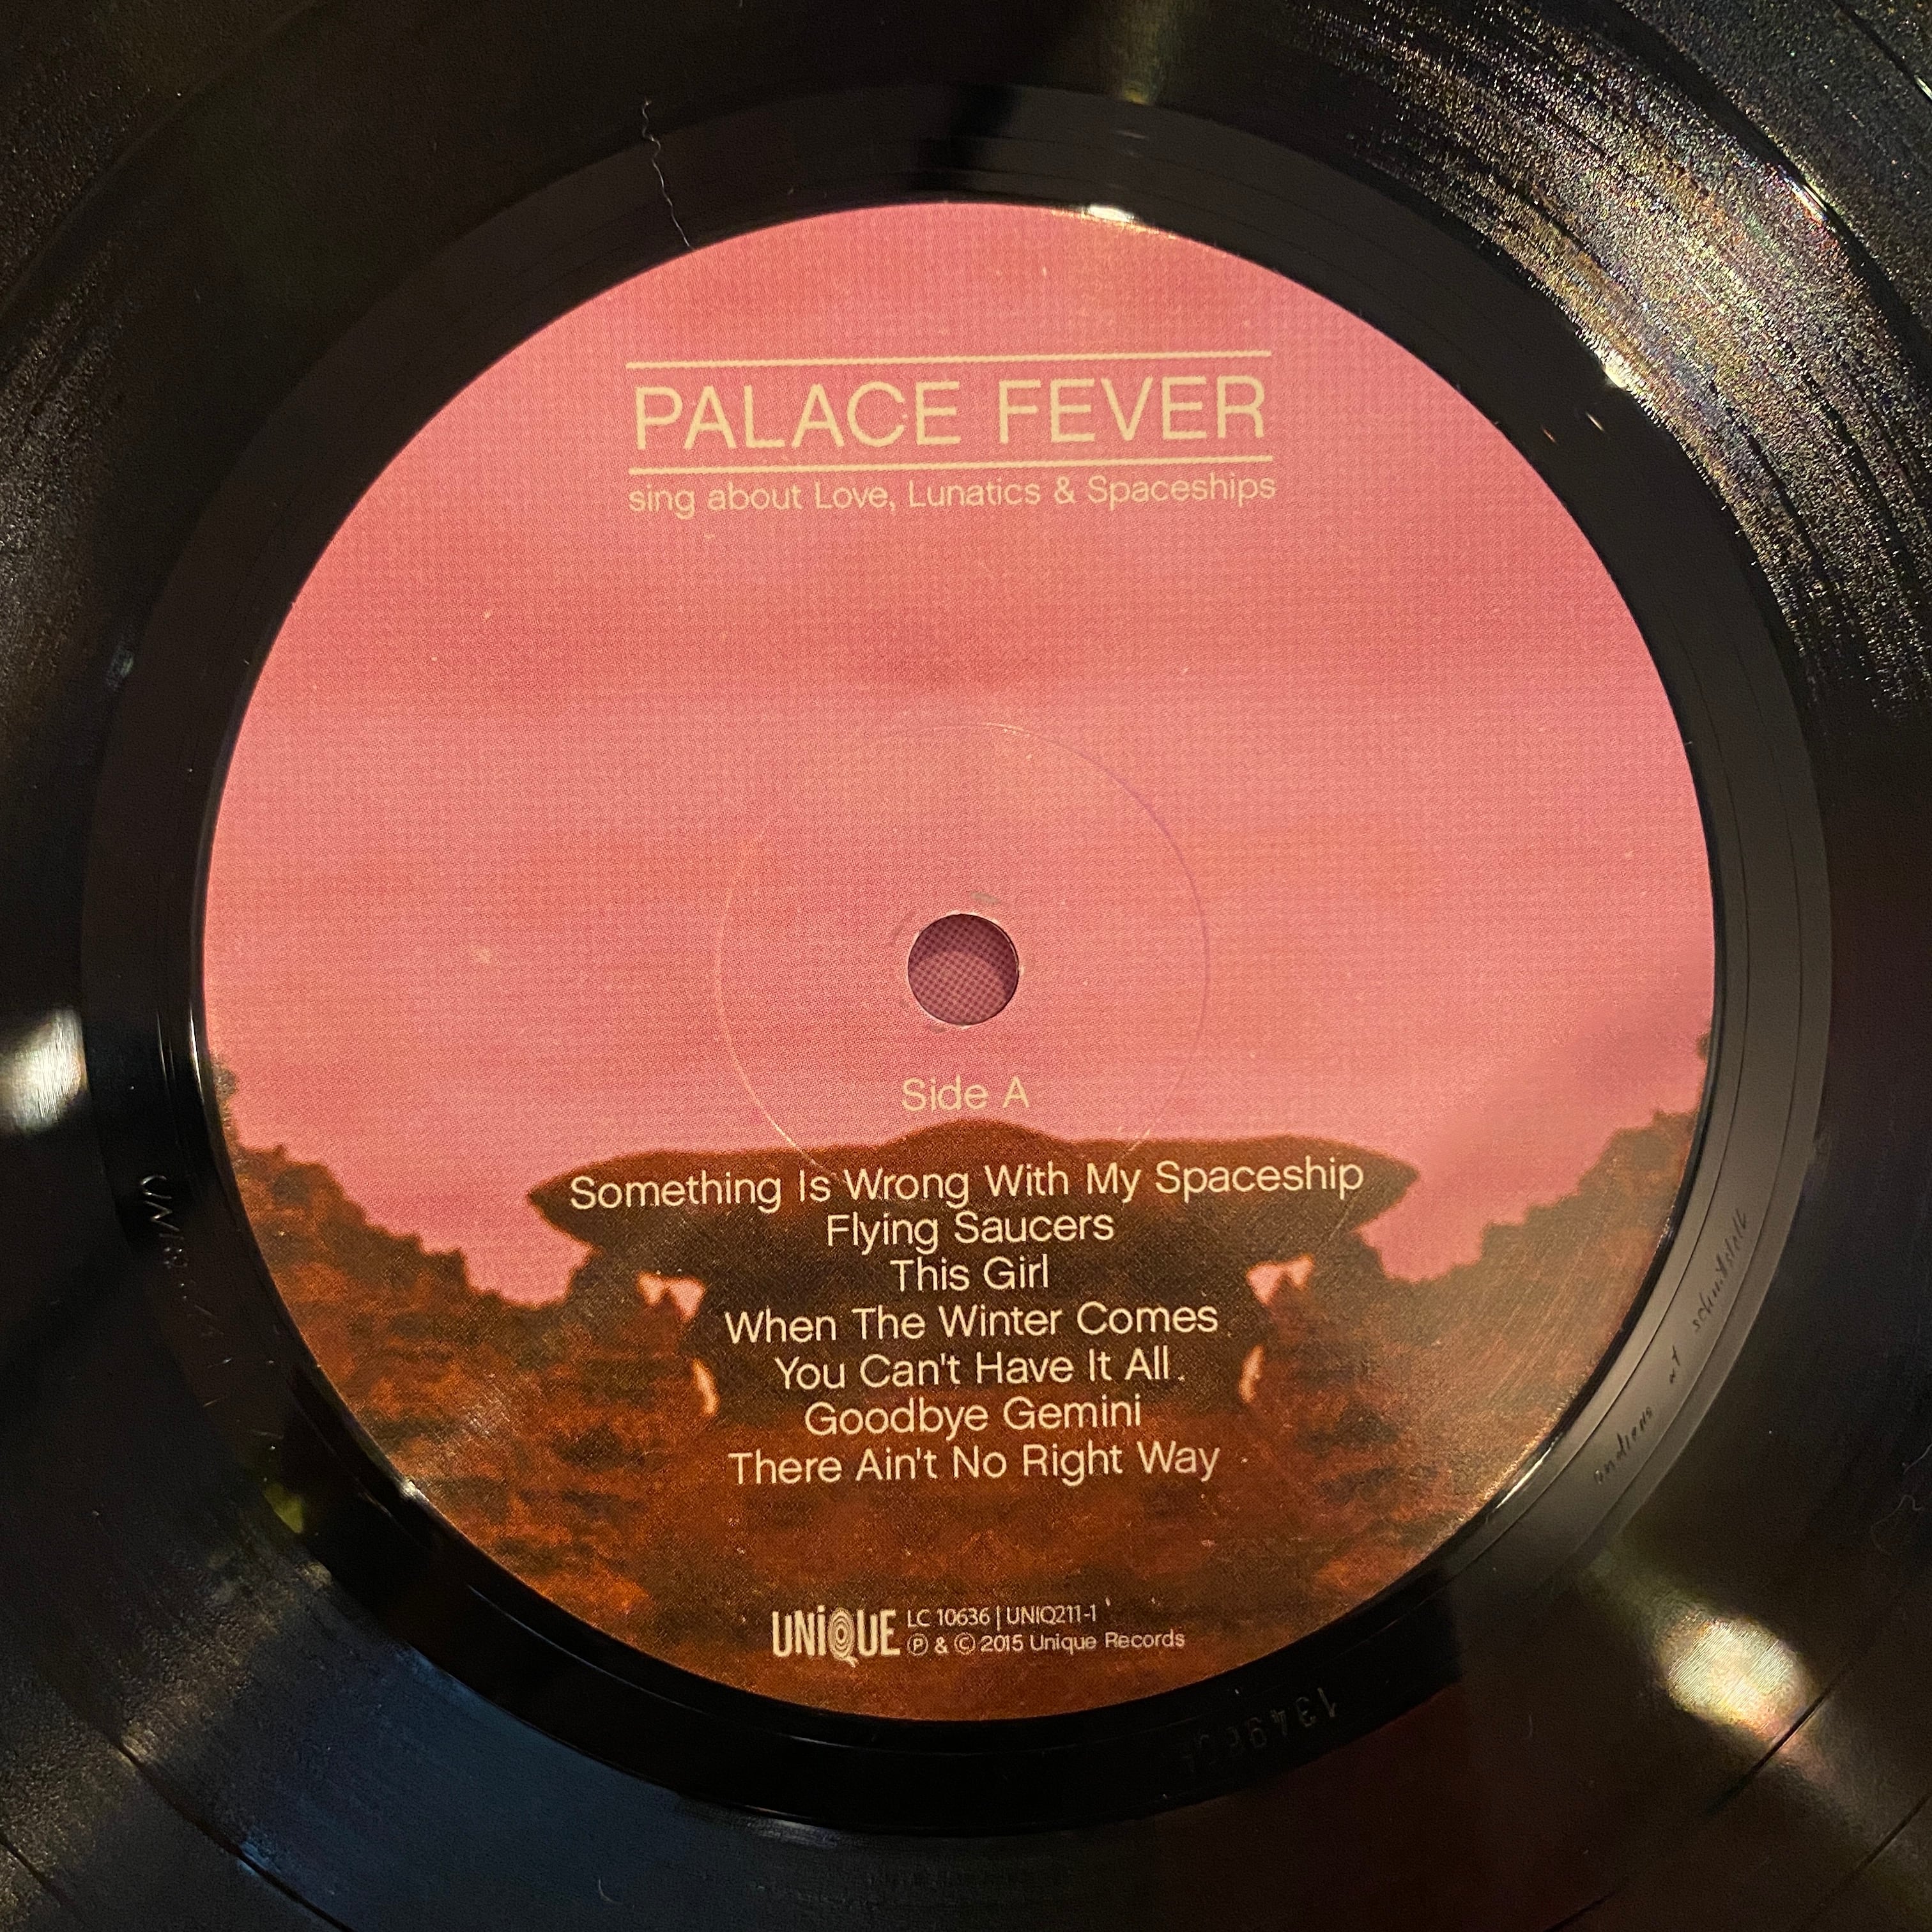 LP】PALACE FEVER/Palace Fever Sing About Love, Lunatics  Spaceships SORC  中古アナログレコード専門店